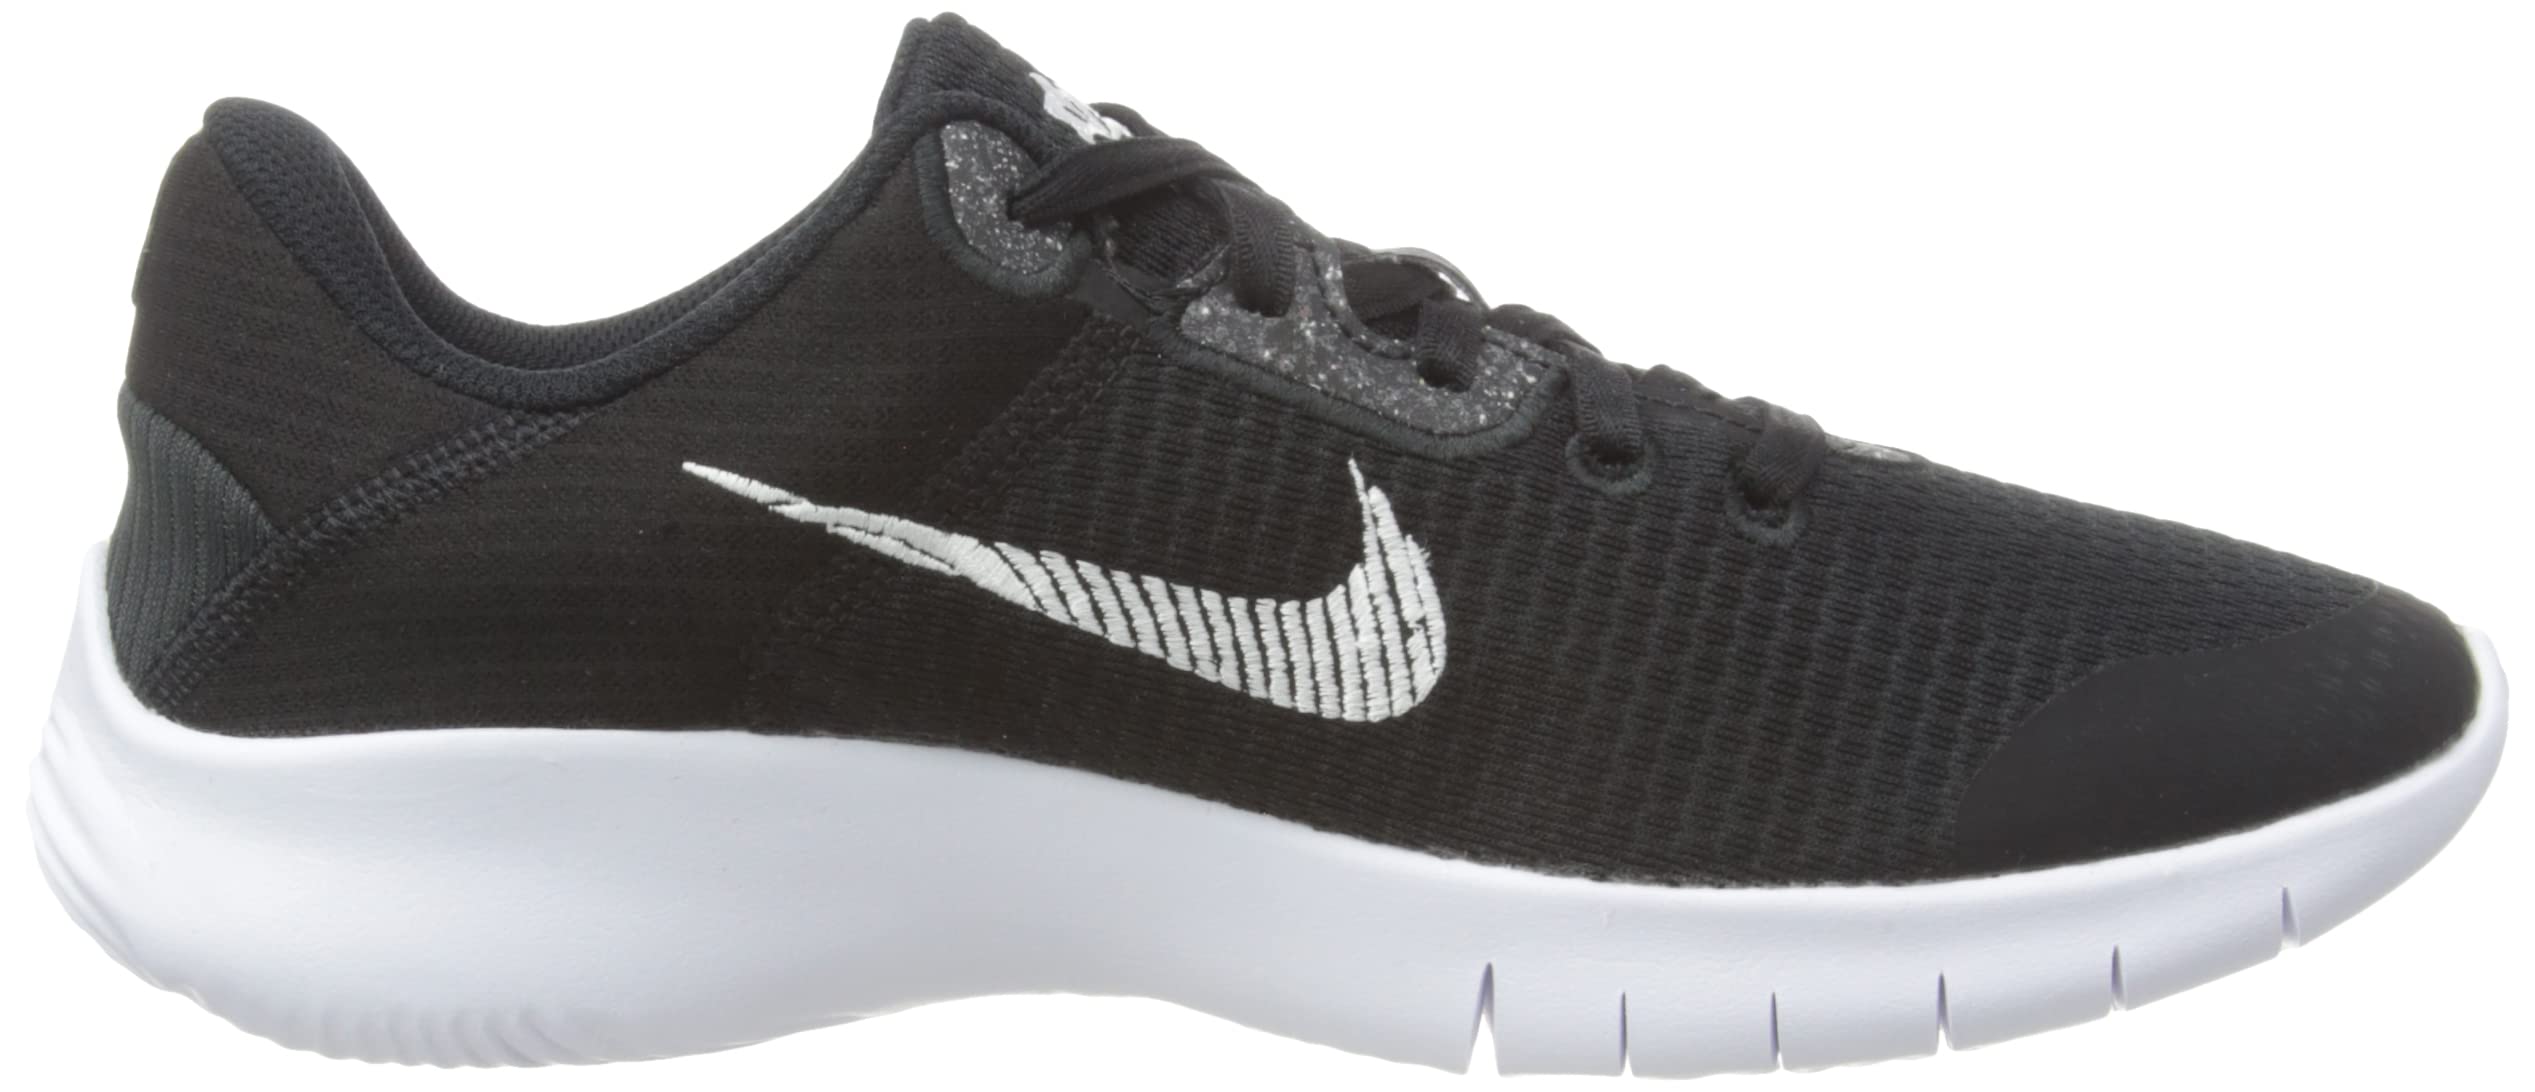 Nike Womens Flex Experience RN 11 Nn Running Trainers Dd9283 Sneakers Shoes